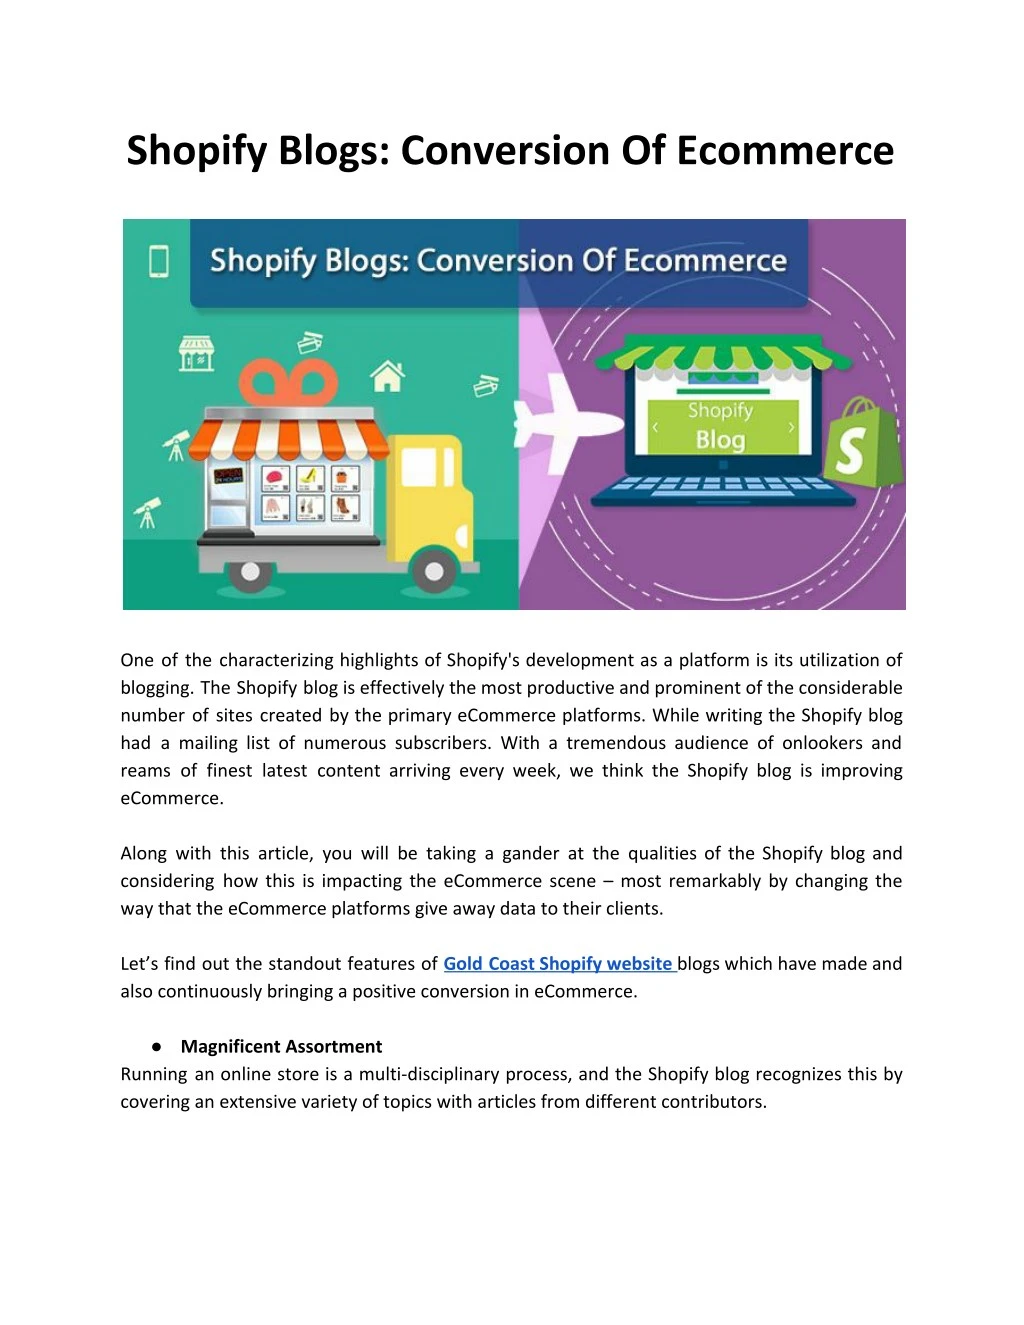 shopify blogs conversion of ecommerce